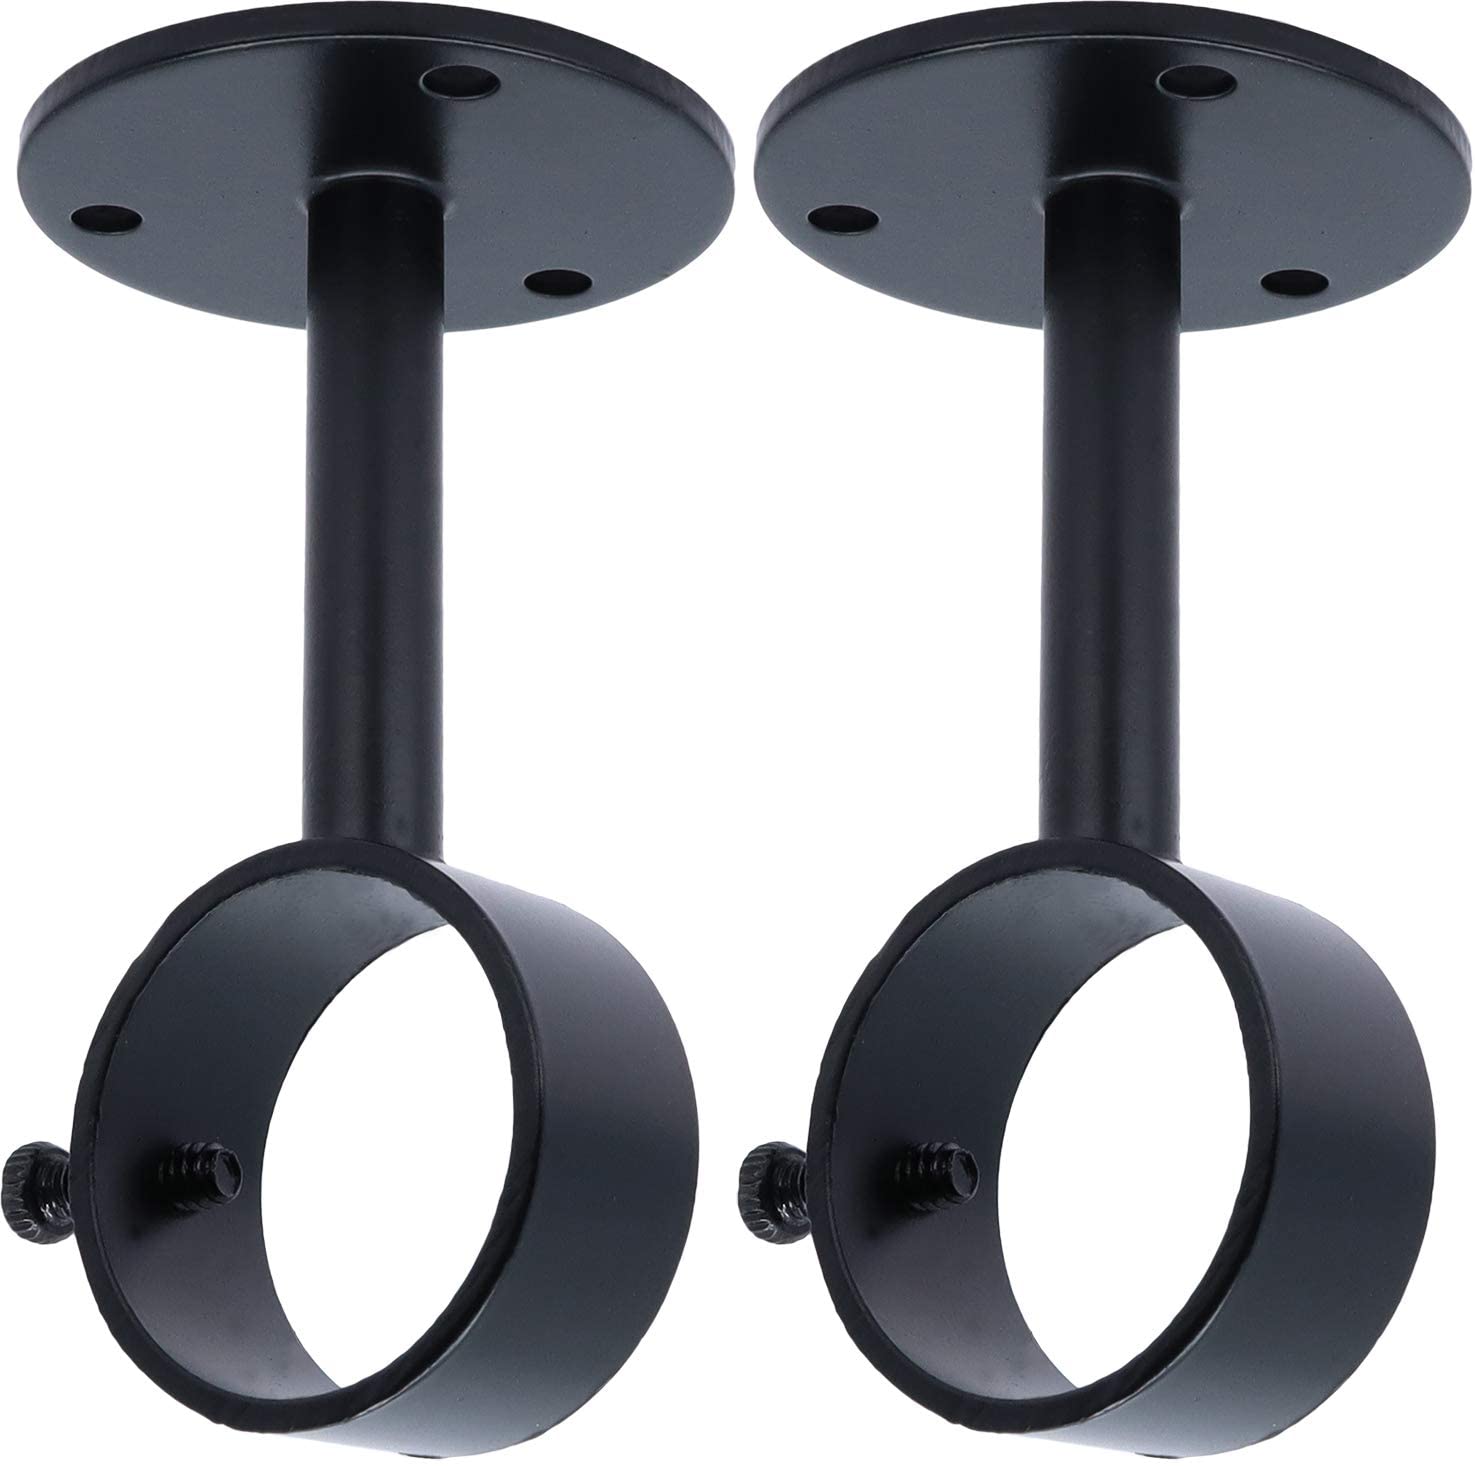 Home Decorators Collection Ceiling-Mount Curtain Rod Bracket in Black